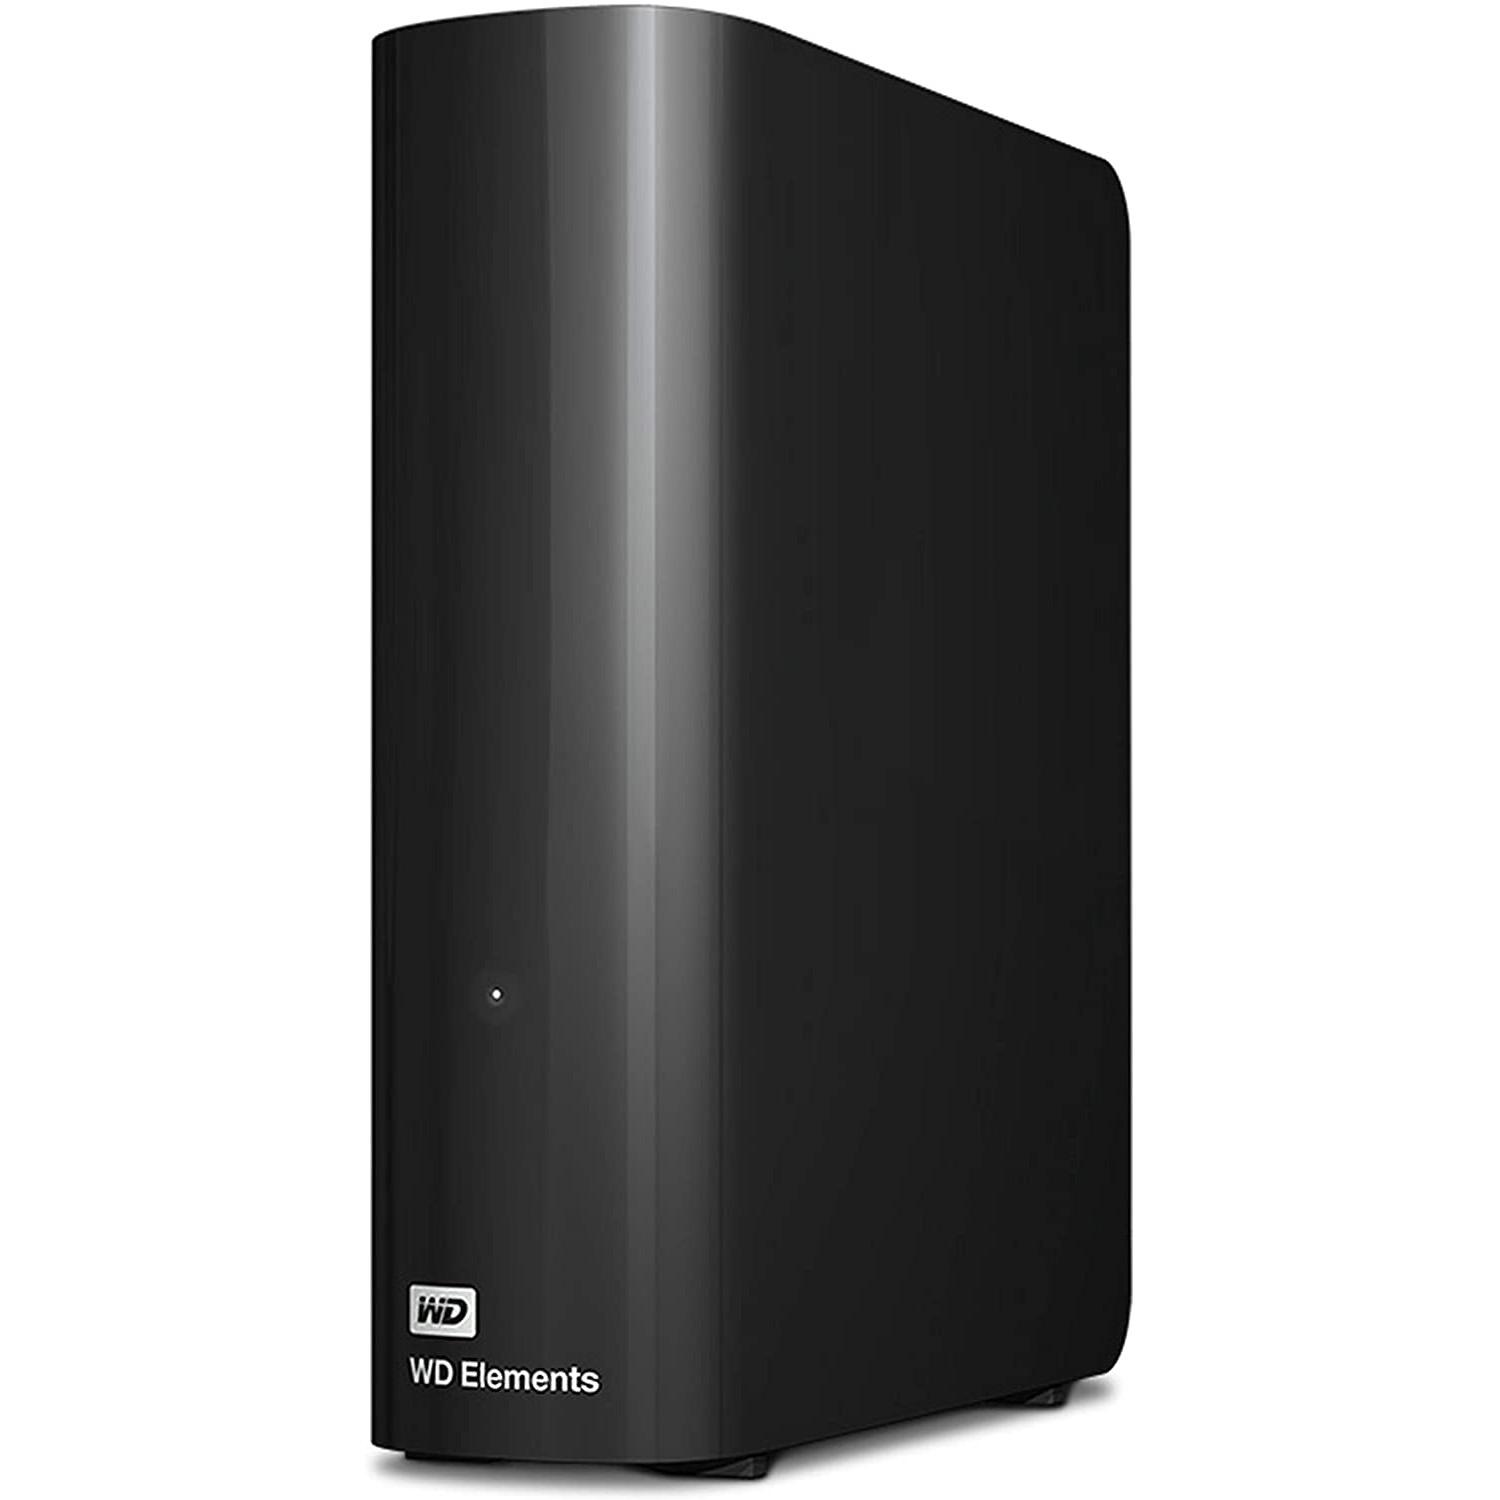 18TB WD Elements USB 3.0 External Hard Drive for $289.33 Shipped